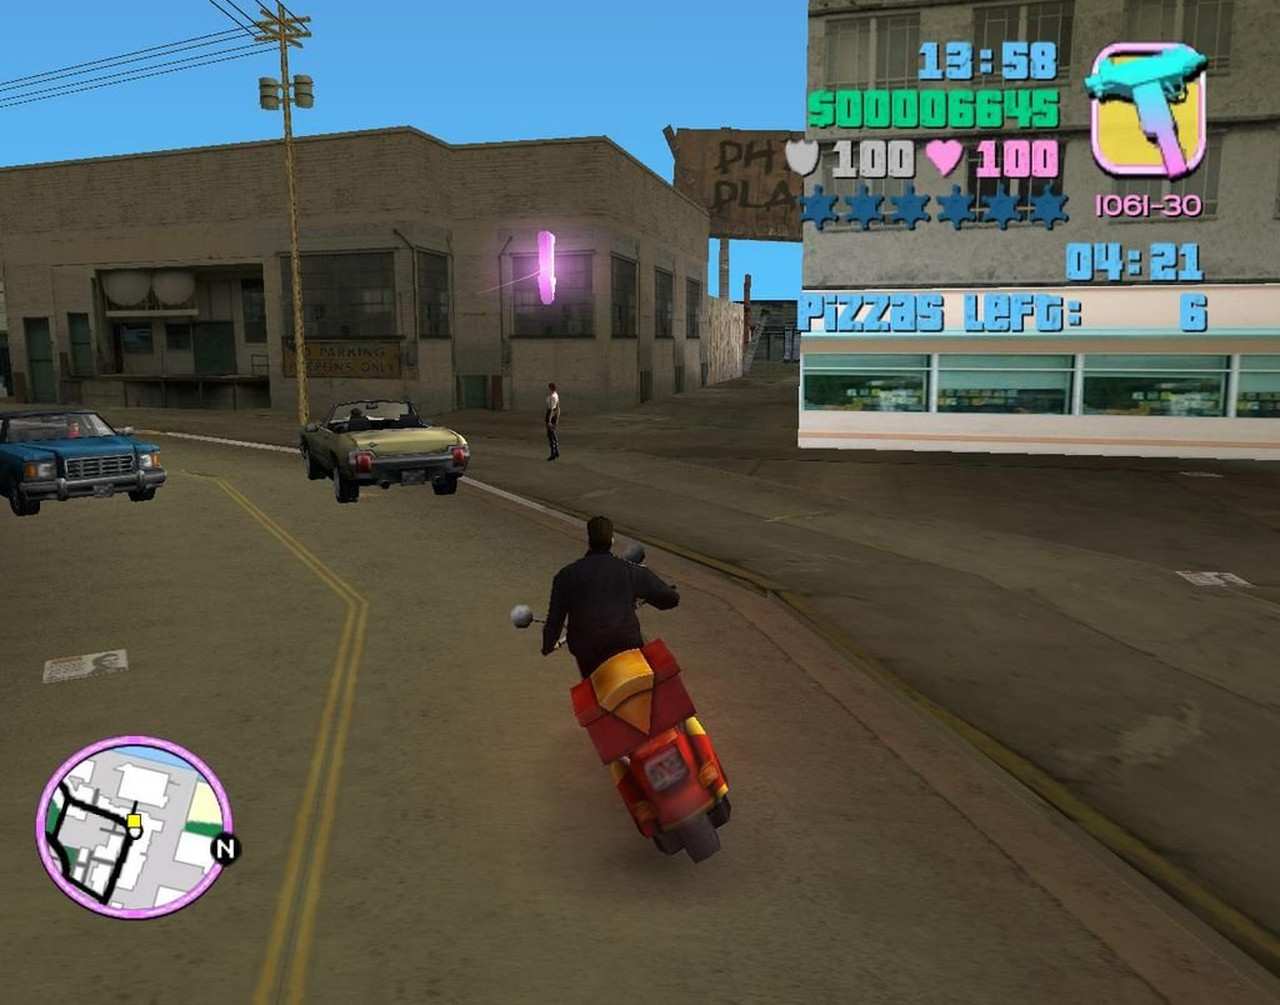 buy grand theft auto 4 pc download